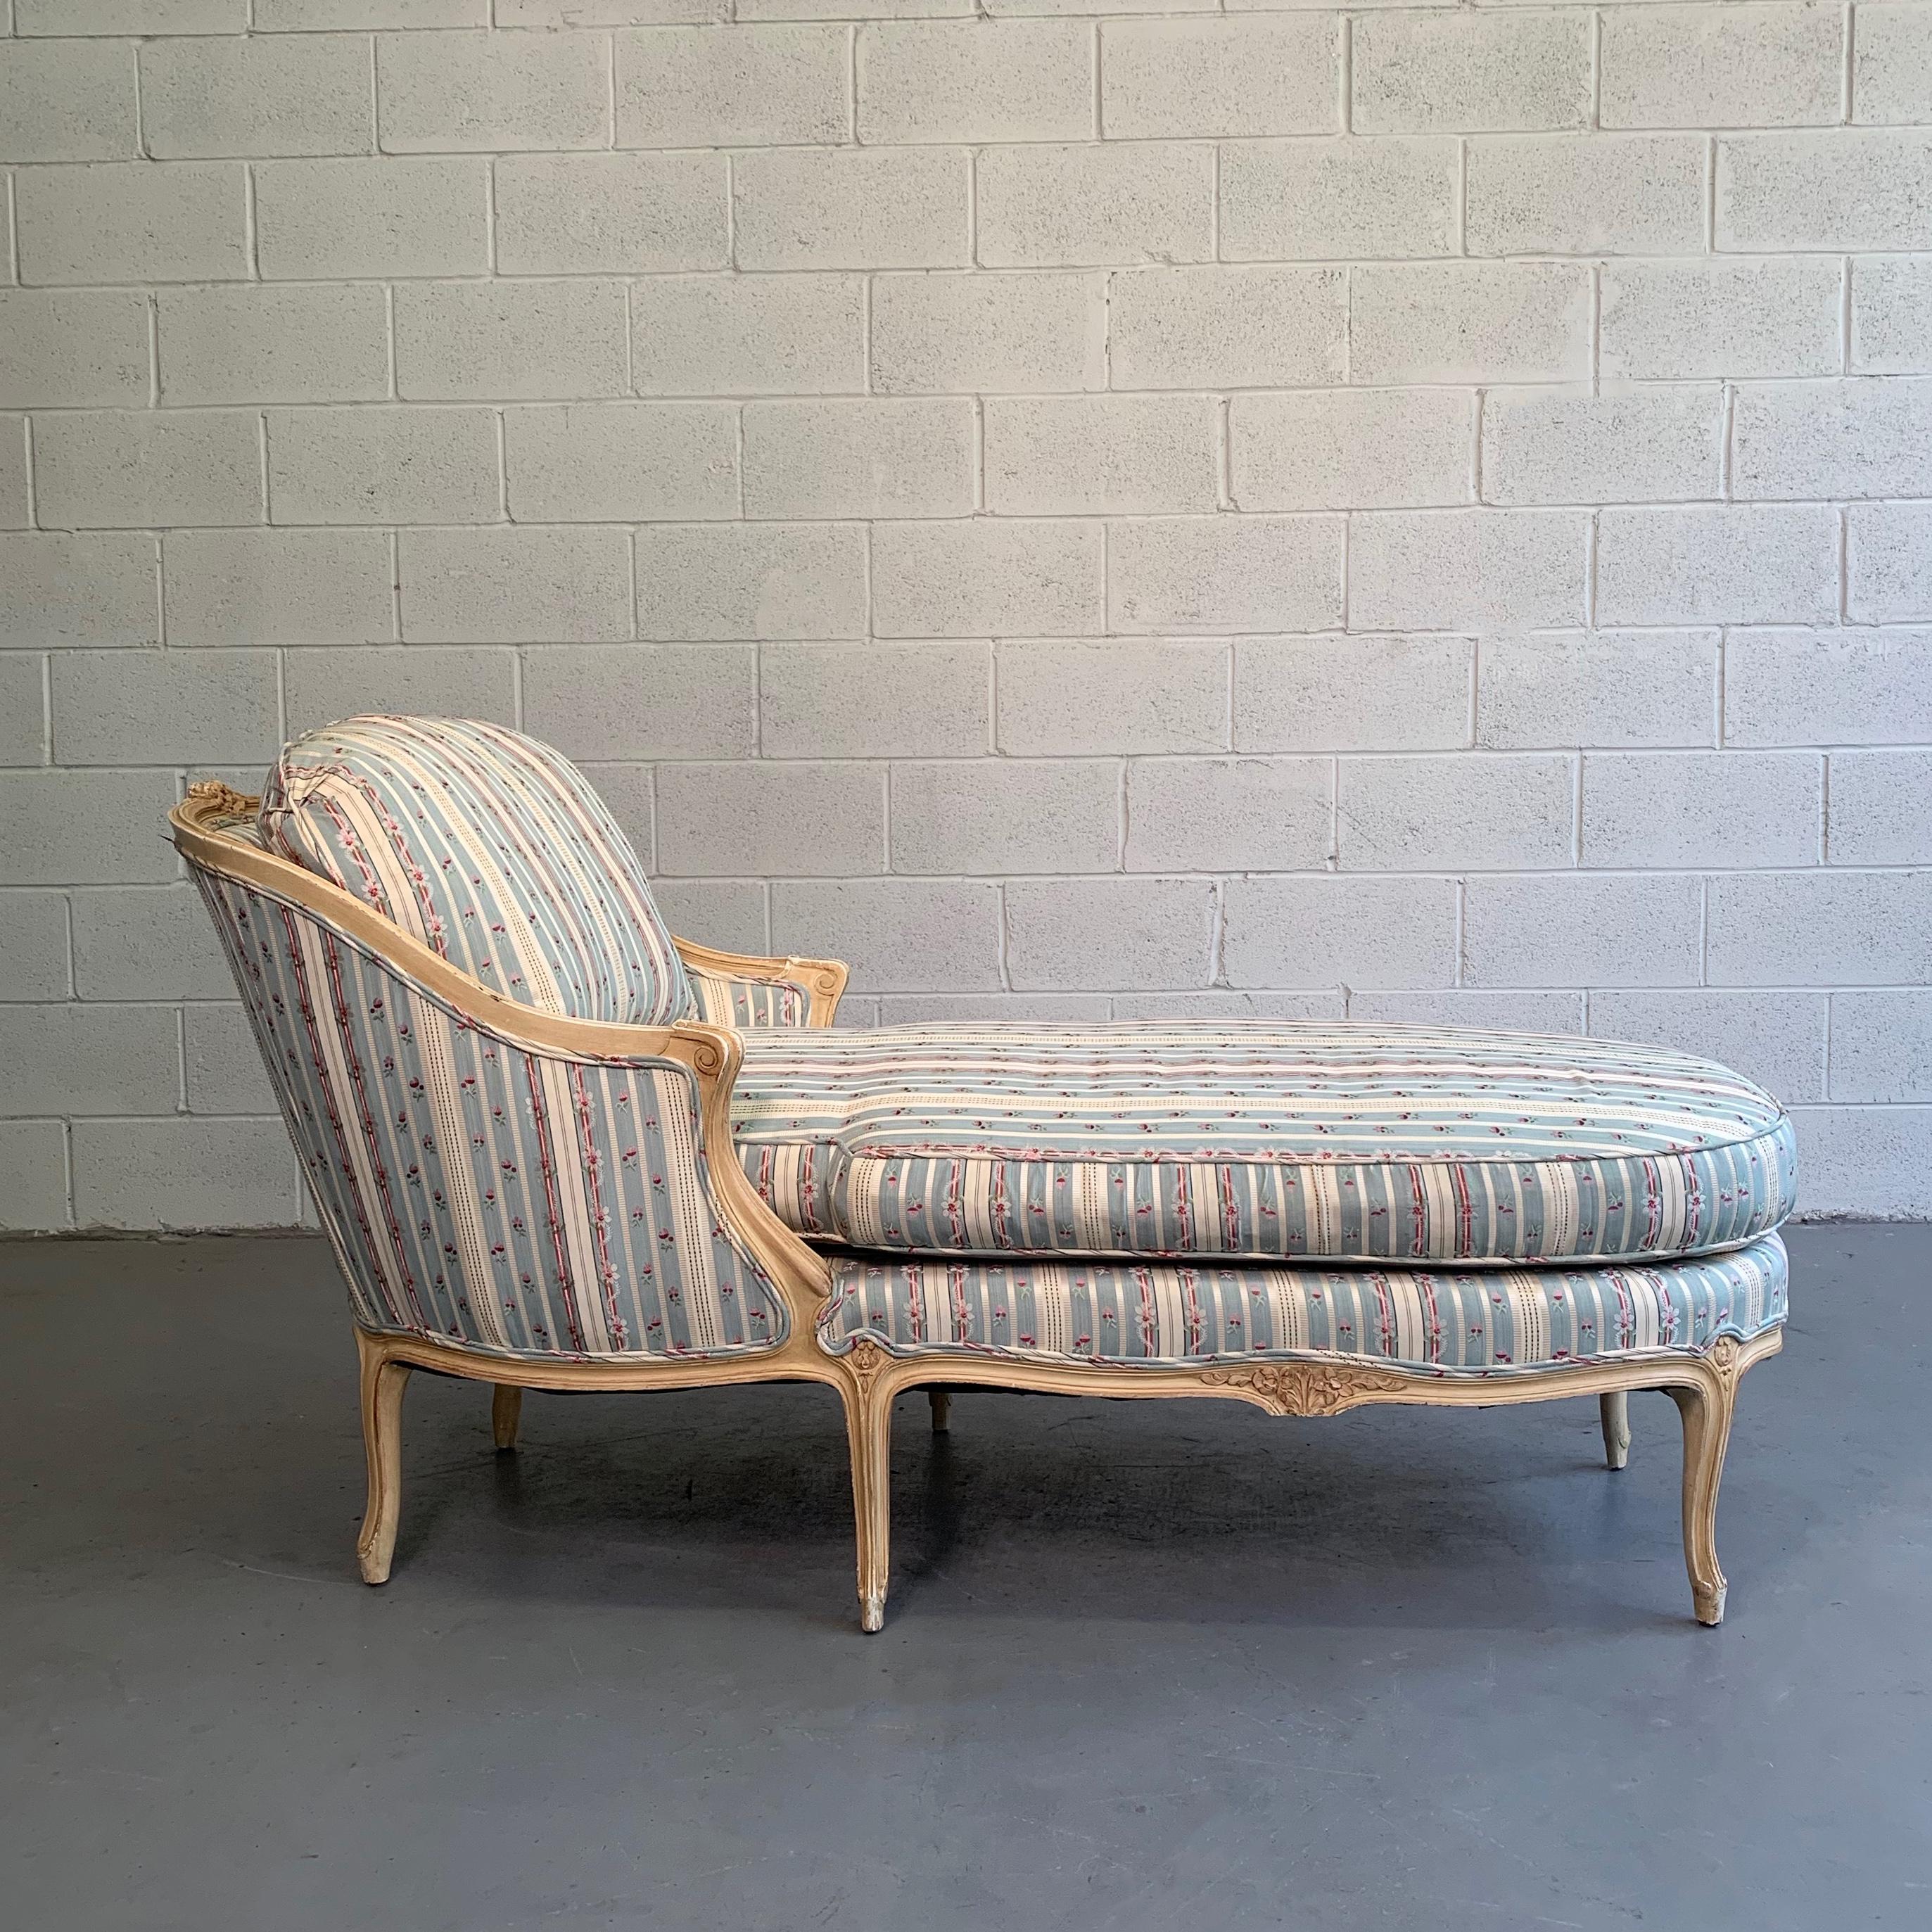 Lovely chaise longue or fainting couch circa 1960s features a carved mahogany frame with striped linen blend upholstery.